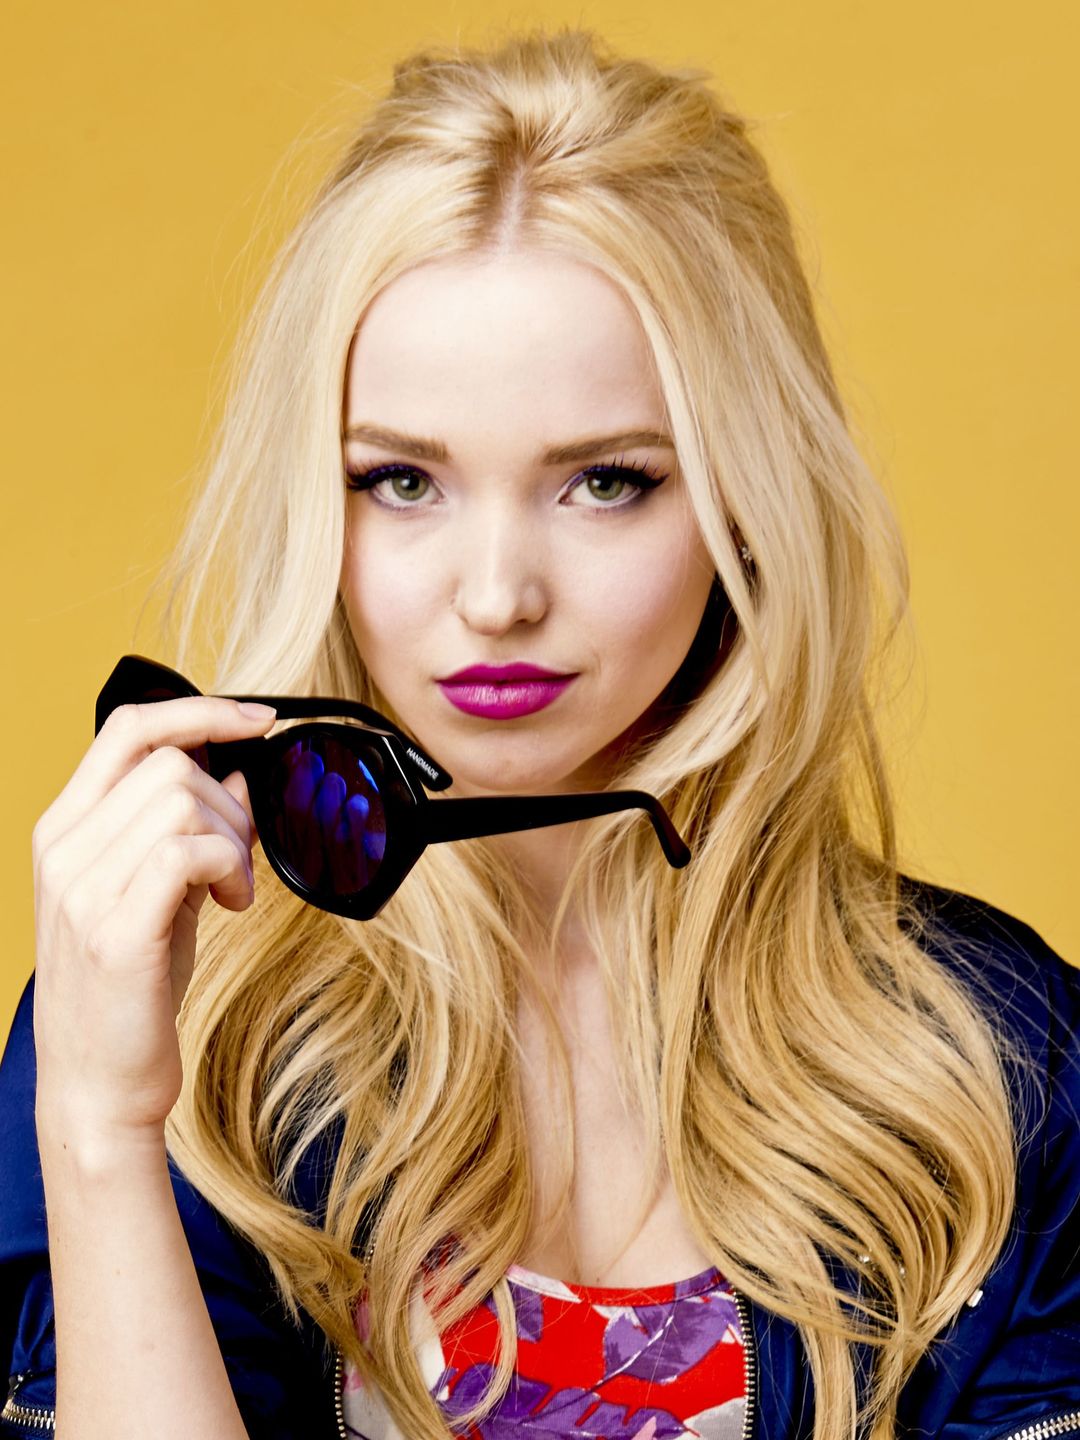 Dove Cameron who is her mother